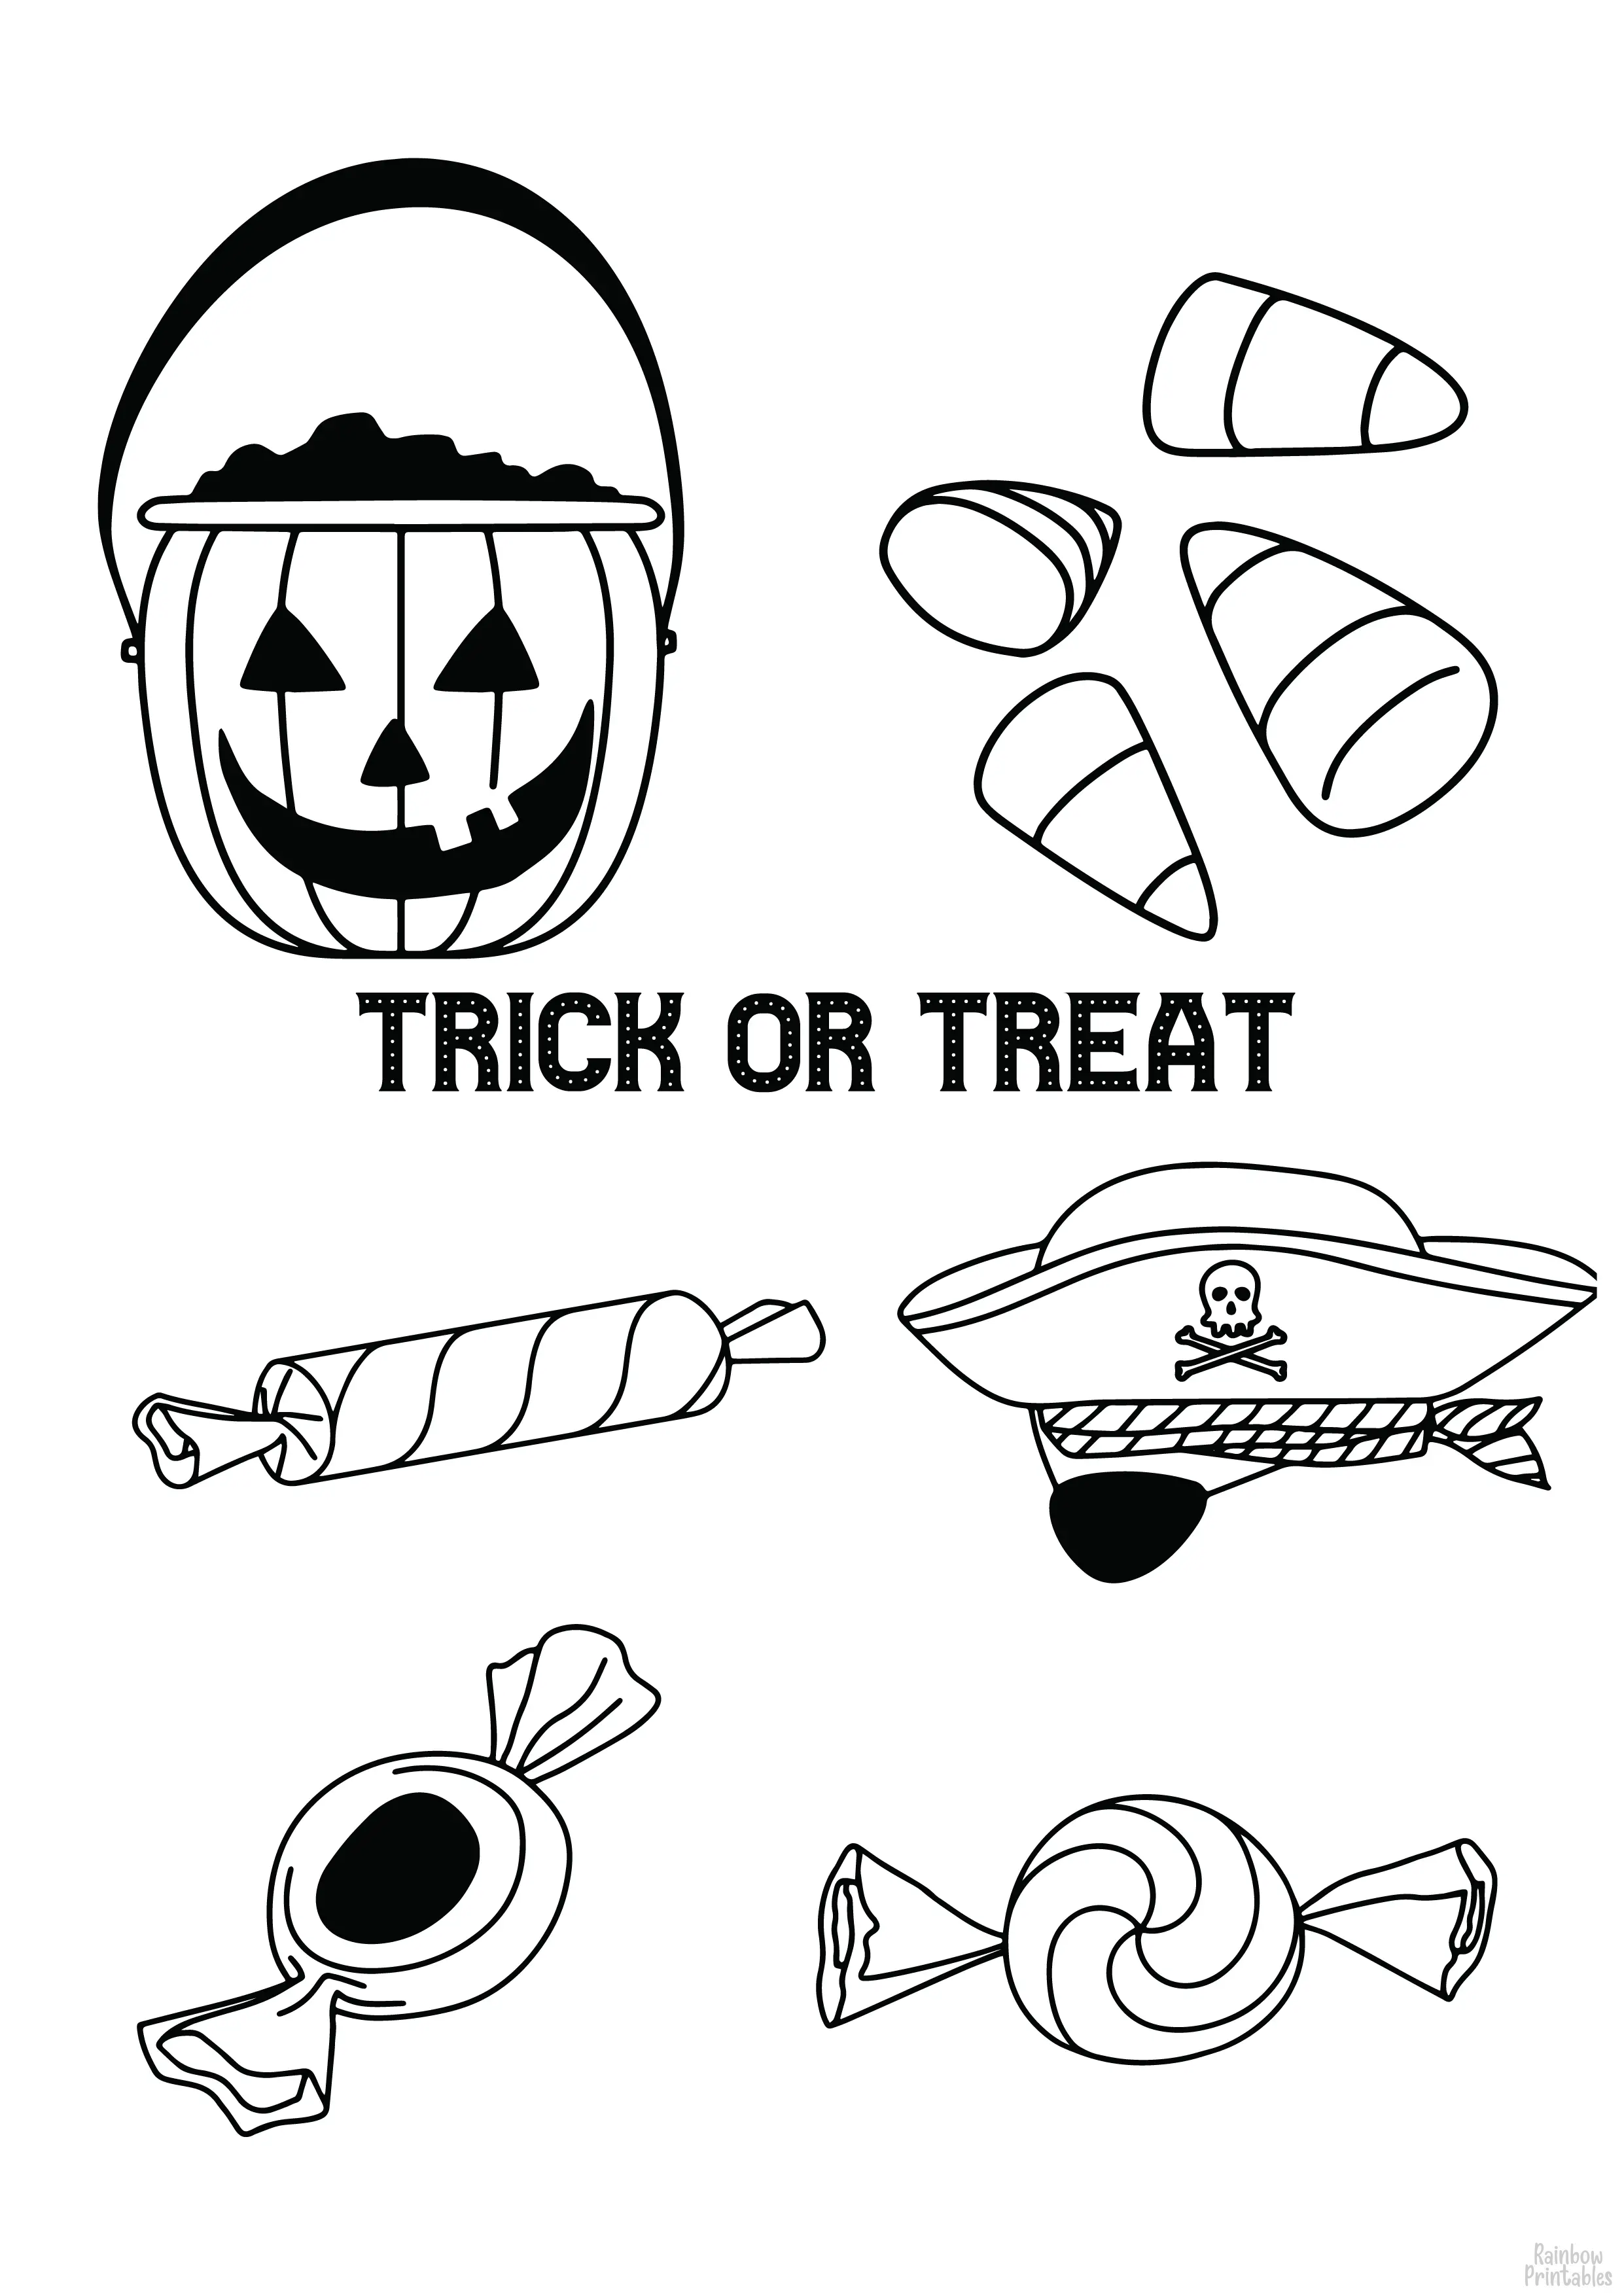 HALLOWEEN TRICK OR TREAT CANDY PUMPKIN BUCKETS Line Art Drawing Set Free Activity Coloring Pages for Kids